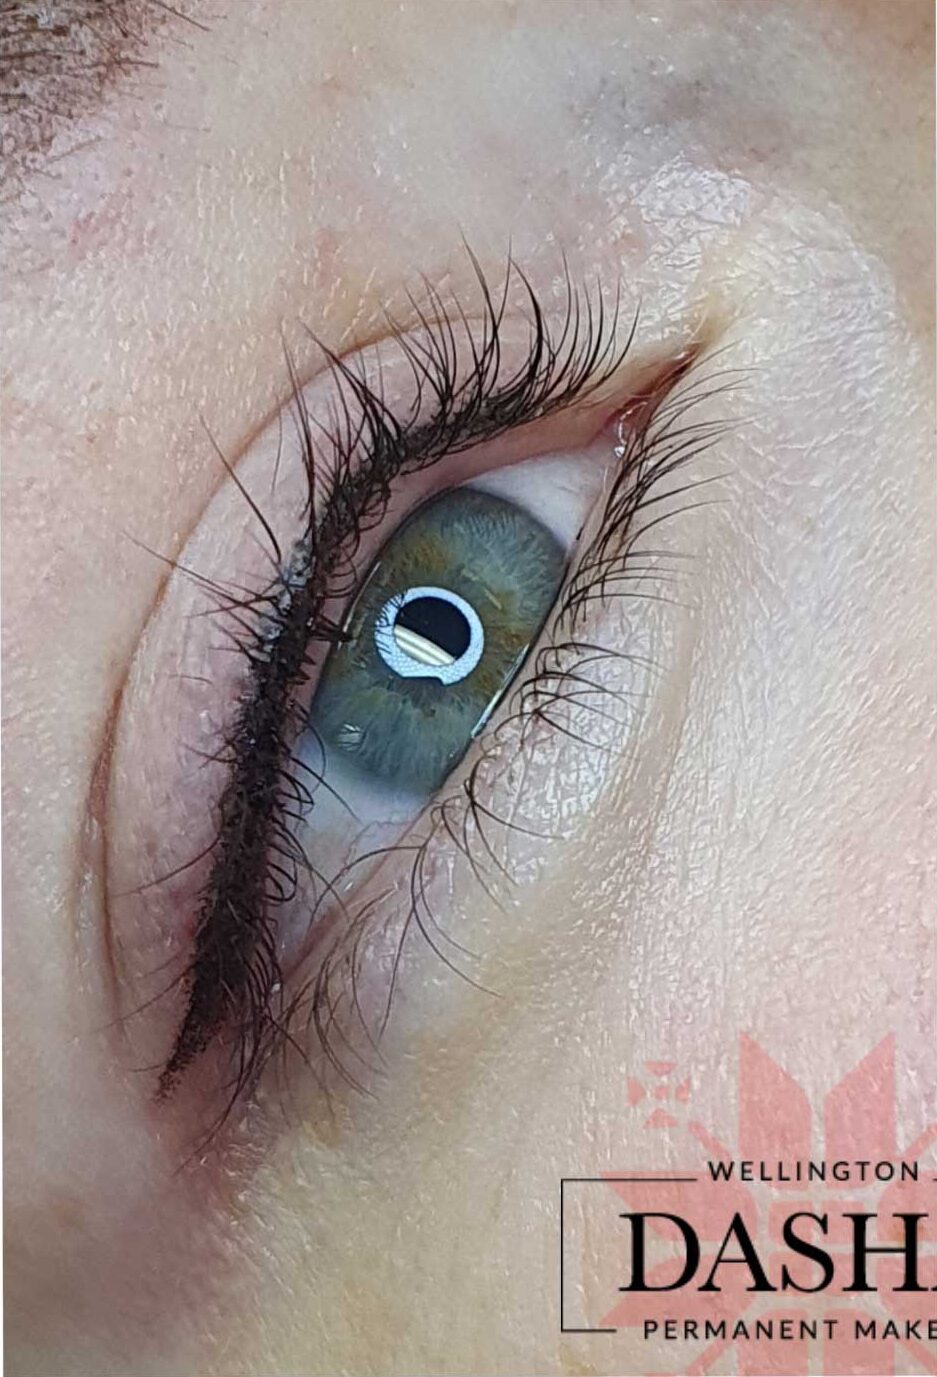 Thin Eyeliner Cosmetic Tattoo. Cosmetic and Mediical Tattoo by Dasha. Permanent makeup and reconstructive tattoo, scalp micro-pigmentation in Christchurch, New Zealand